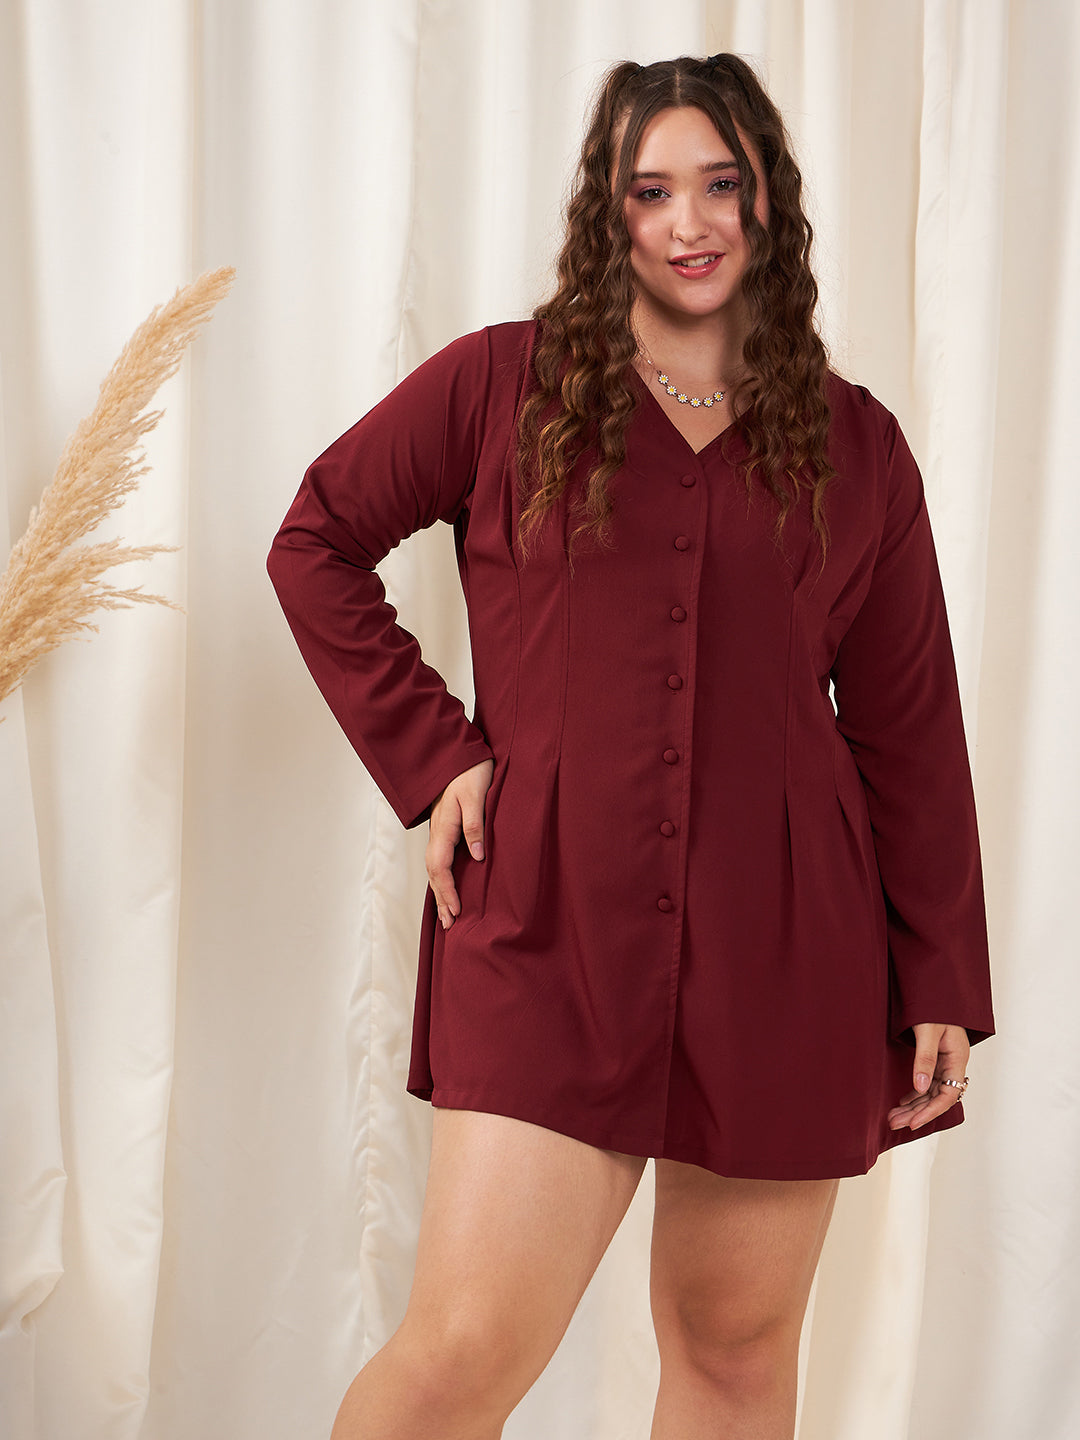 Buy Black Cotton Embroidered Plus Size Shirt Dress Online - W for Woman